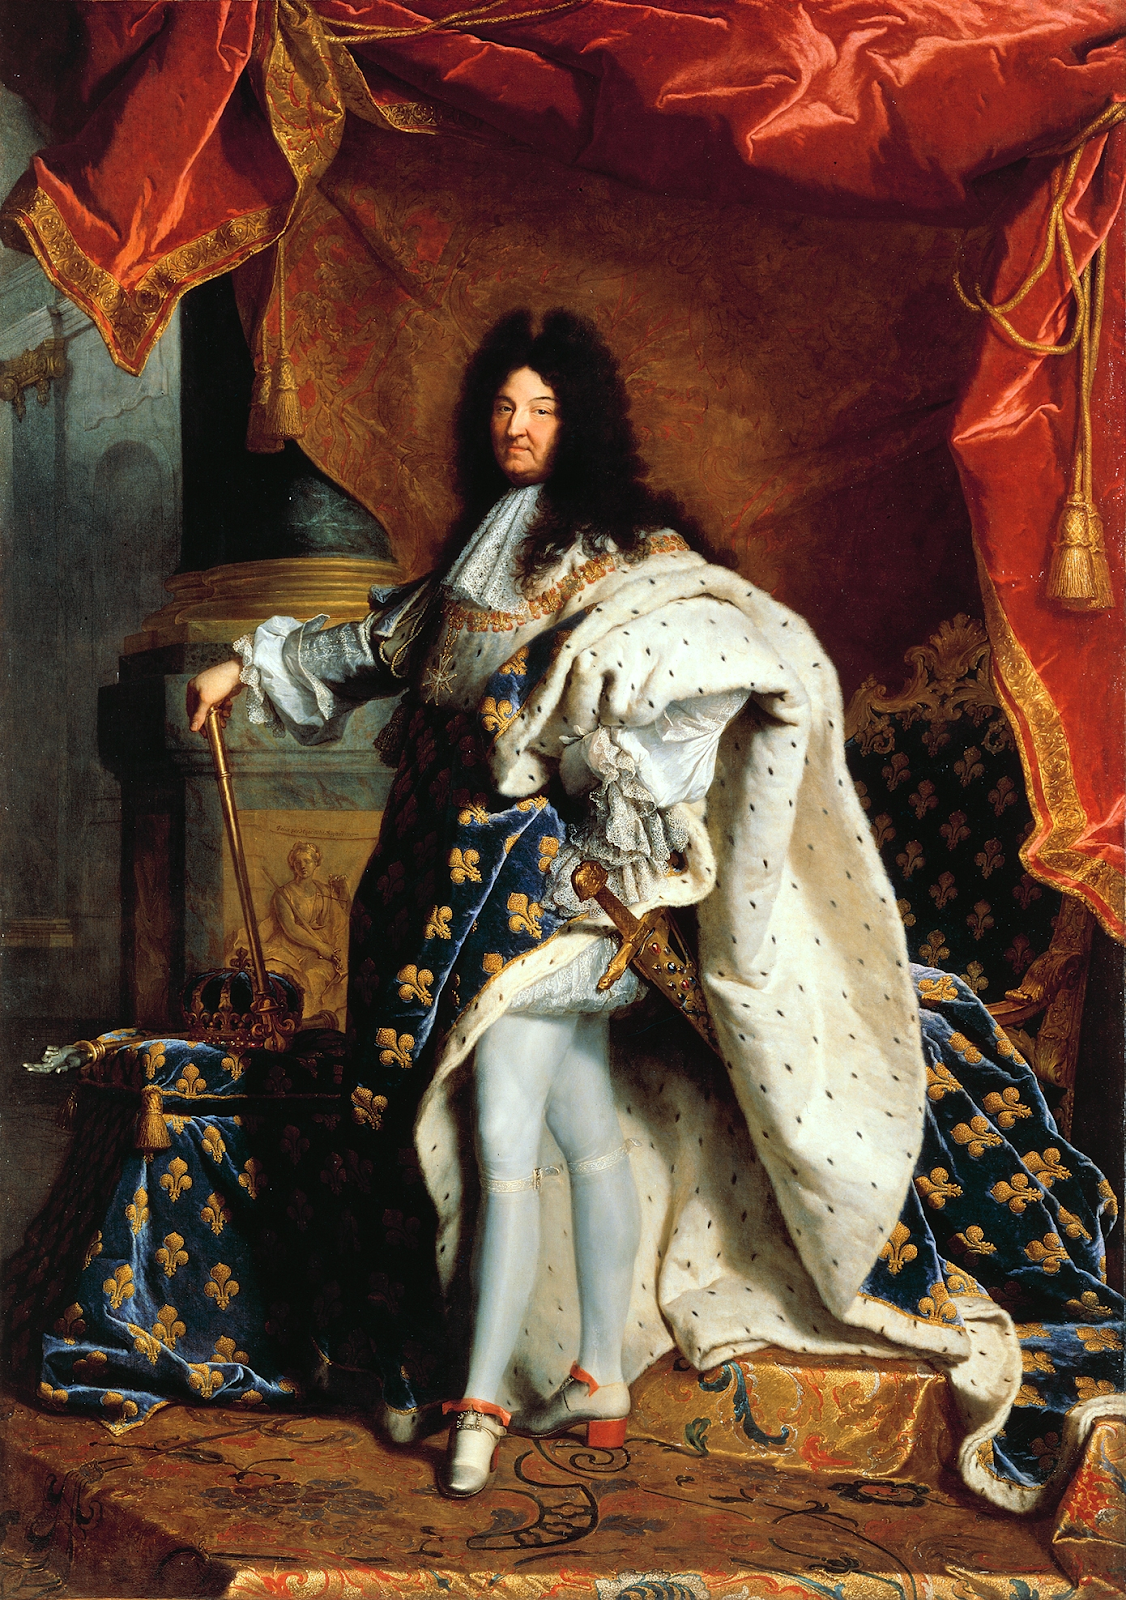 Painting titled "Louis XIV" by Hyacinthe Rigaud. Louis XIV stands in front of a red velvet curtain, ornate column, dressed in white tights and an ermine and blue velvet robe, embroidered with gold fleur de lis. He holds a straight cane. An ornate sword is belted at his side. His crown sits on a small table covered with the same material as the cape.